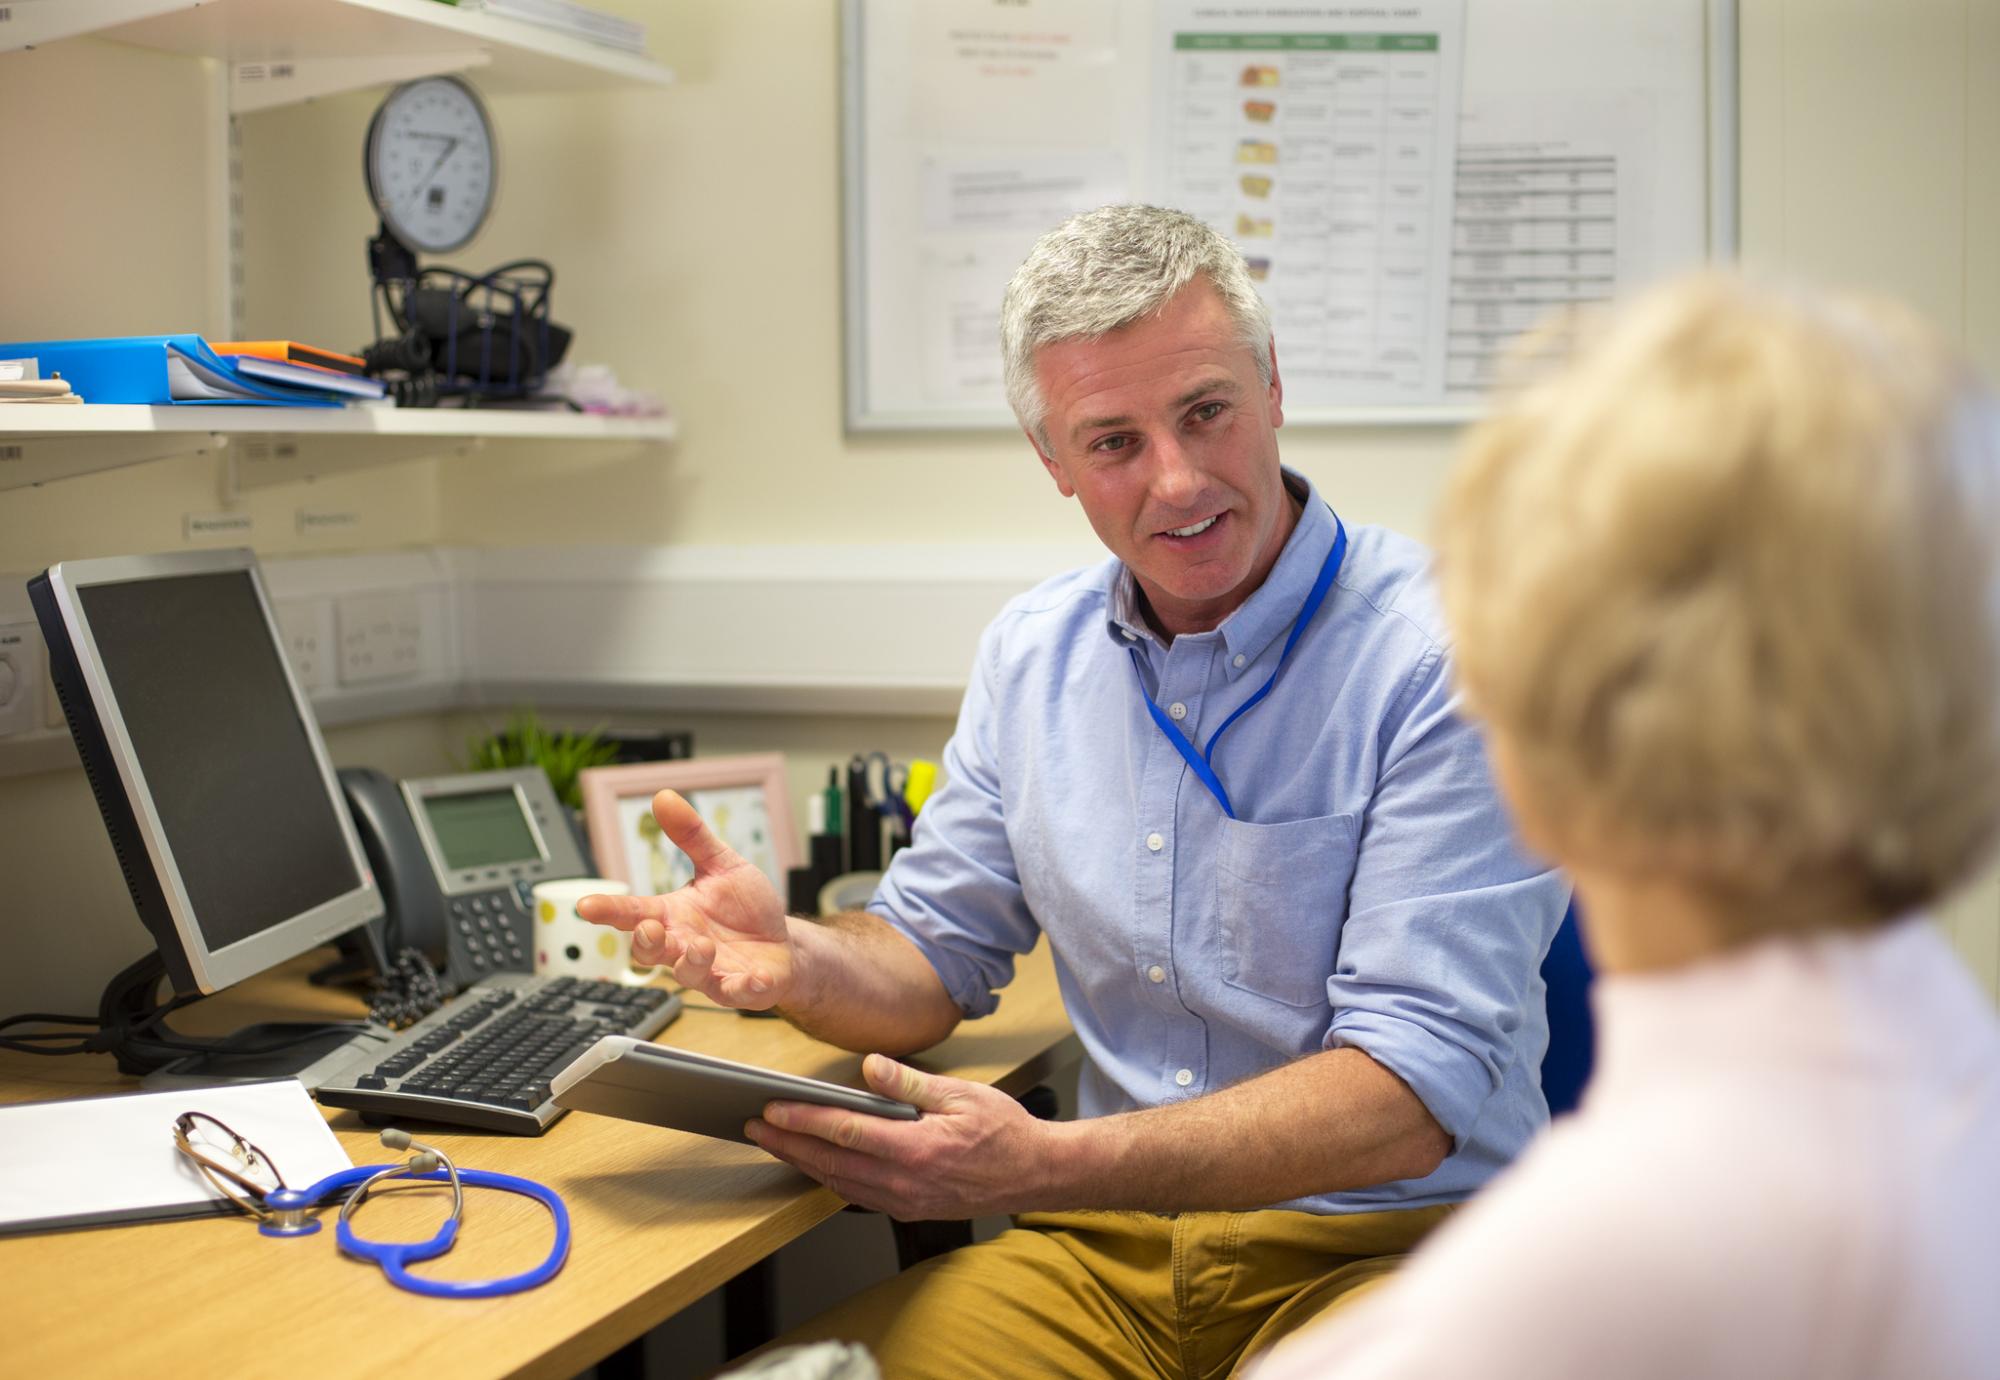 GP speaking with a patient during an appointment